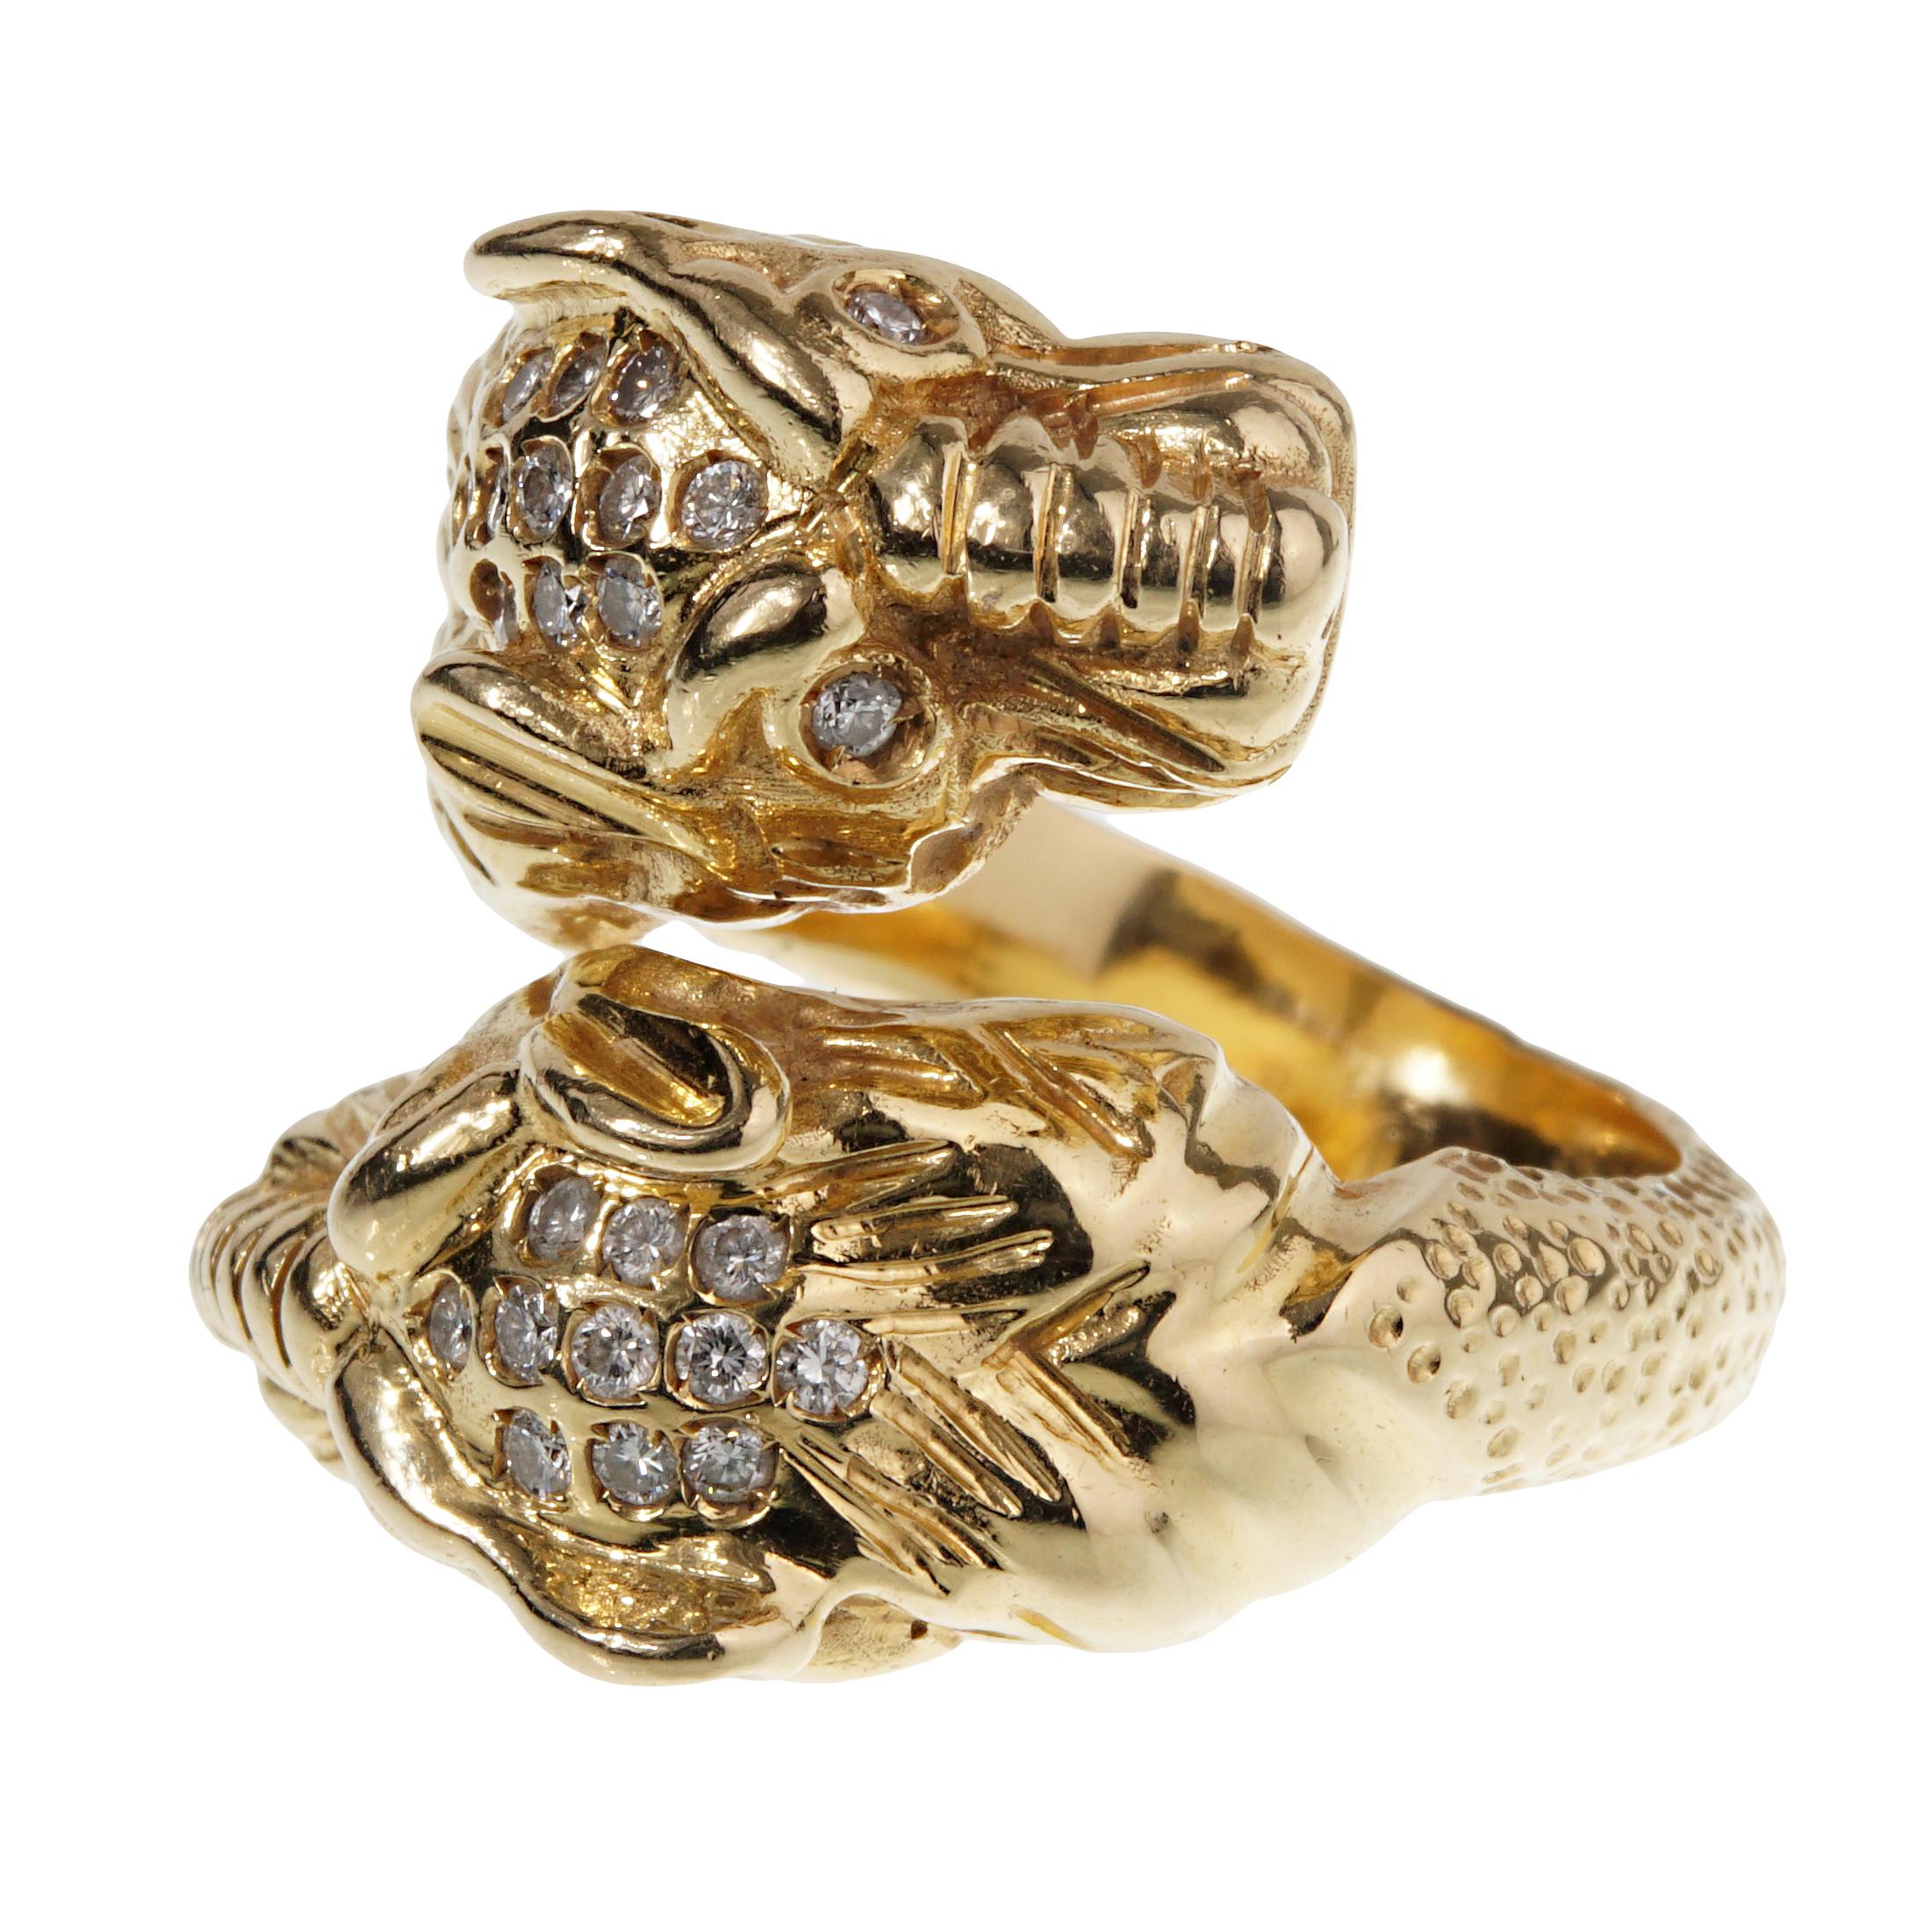 A fierce Gucci cocktail ring showcasing 2 tiger heads adorned with round brilliant cut diamonds set in 18k yellow gold, this fabulous ring measures a size 7 and can be resized if needed.